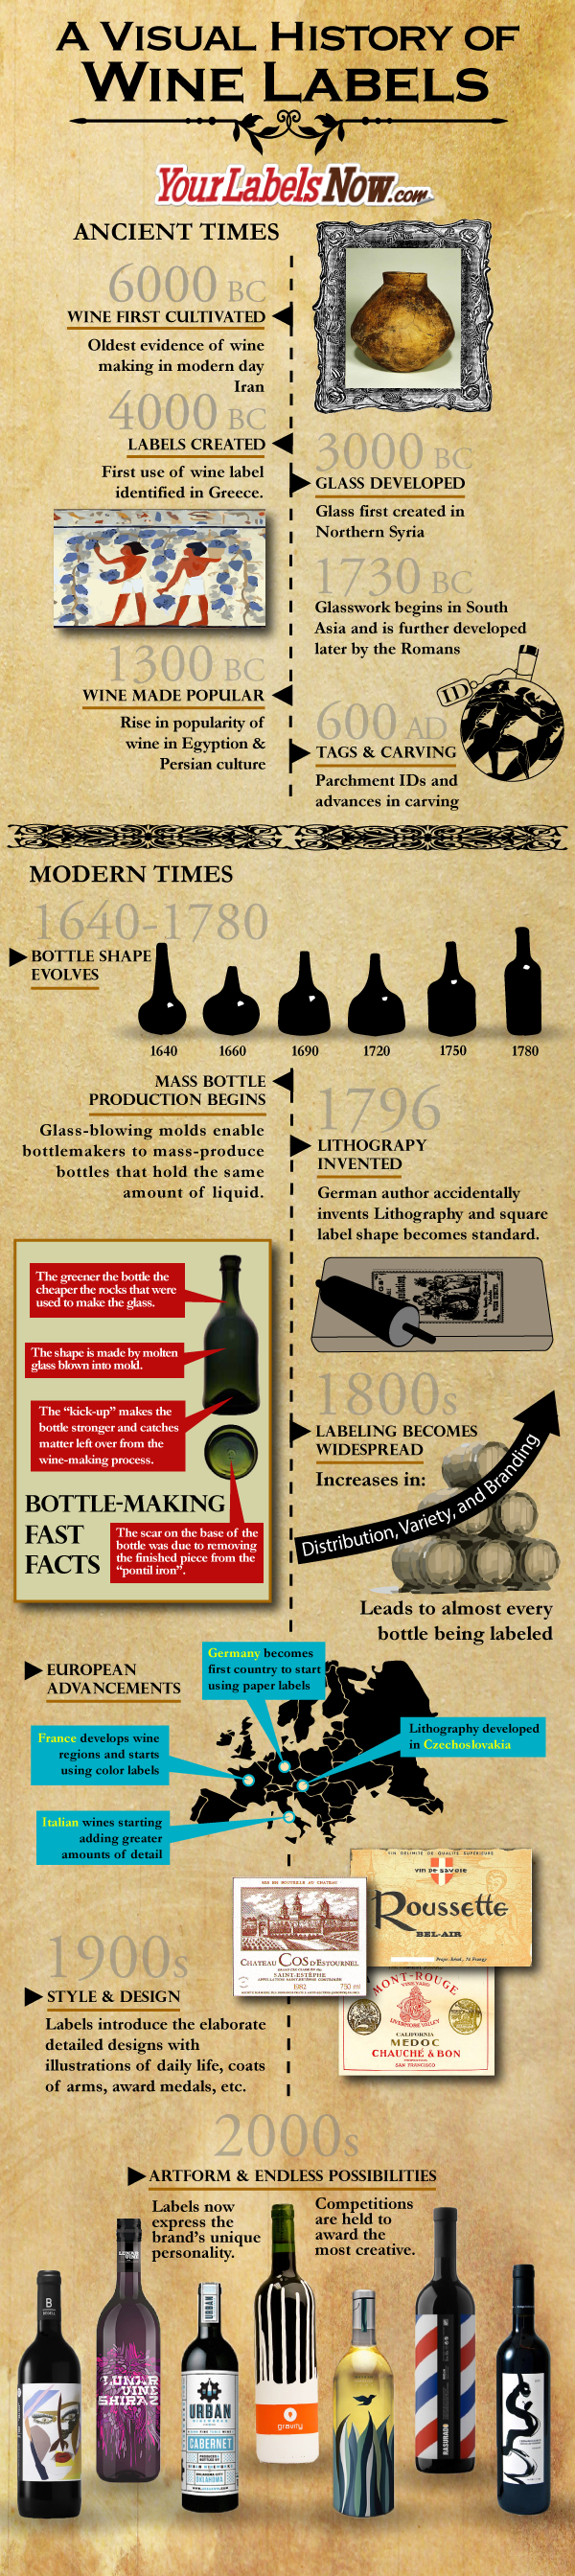 History of Wine Labels